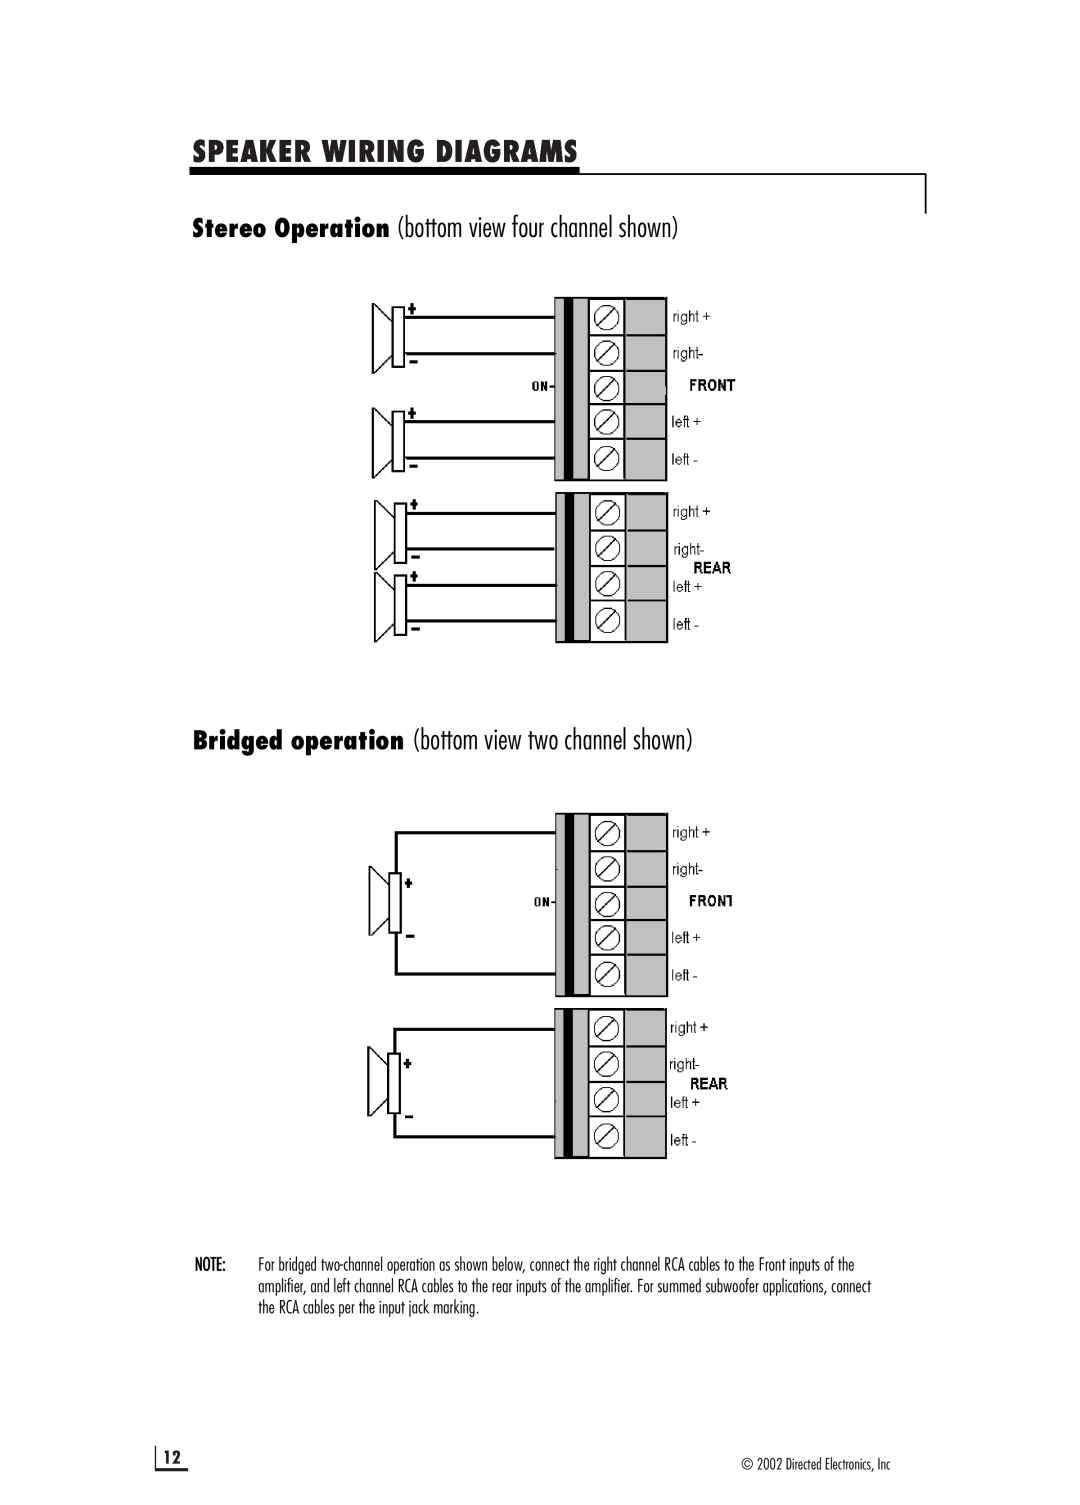 Viper 500.4 manual Speaker Wiring Diagrams, Stereo Operation bottom view four channel shown 